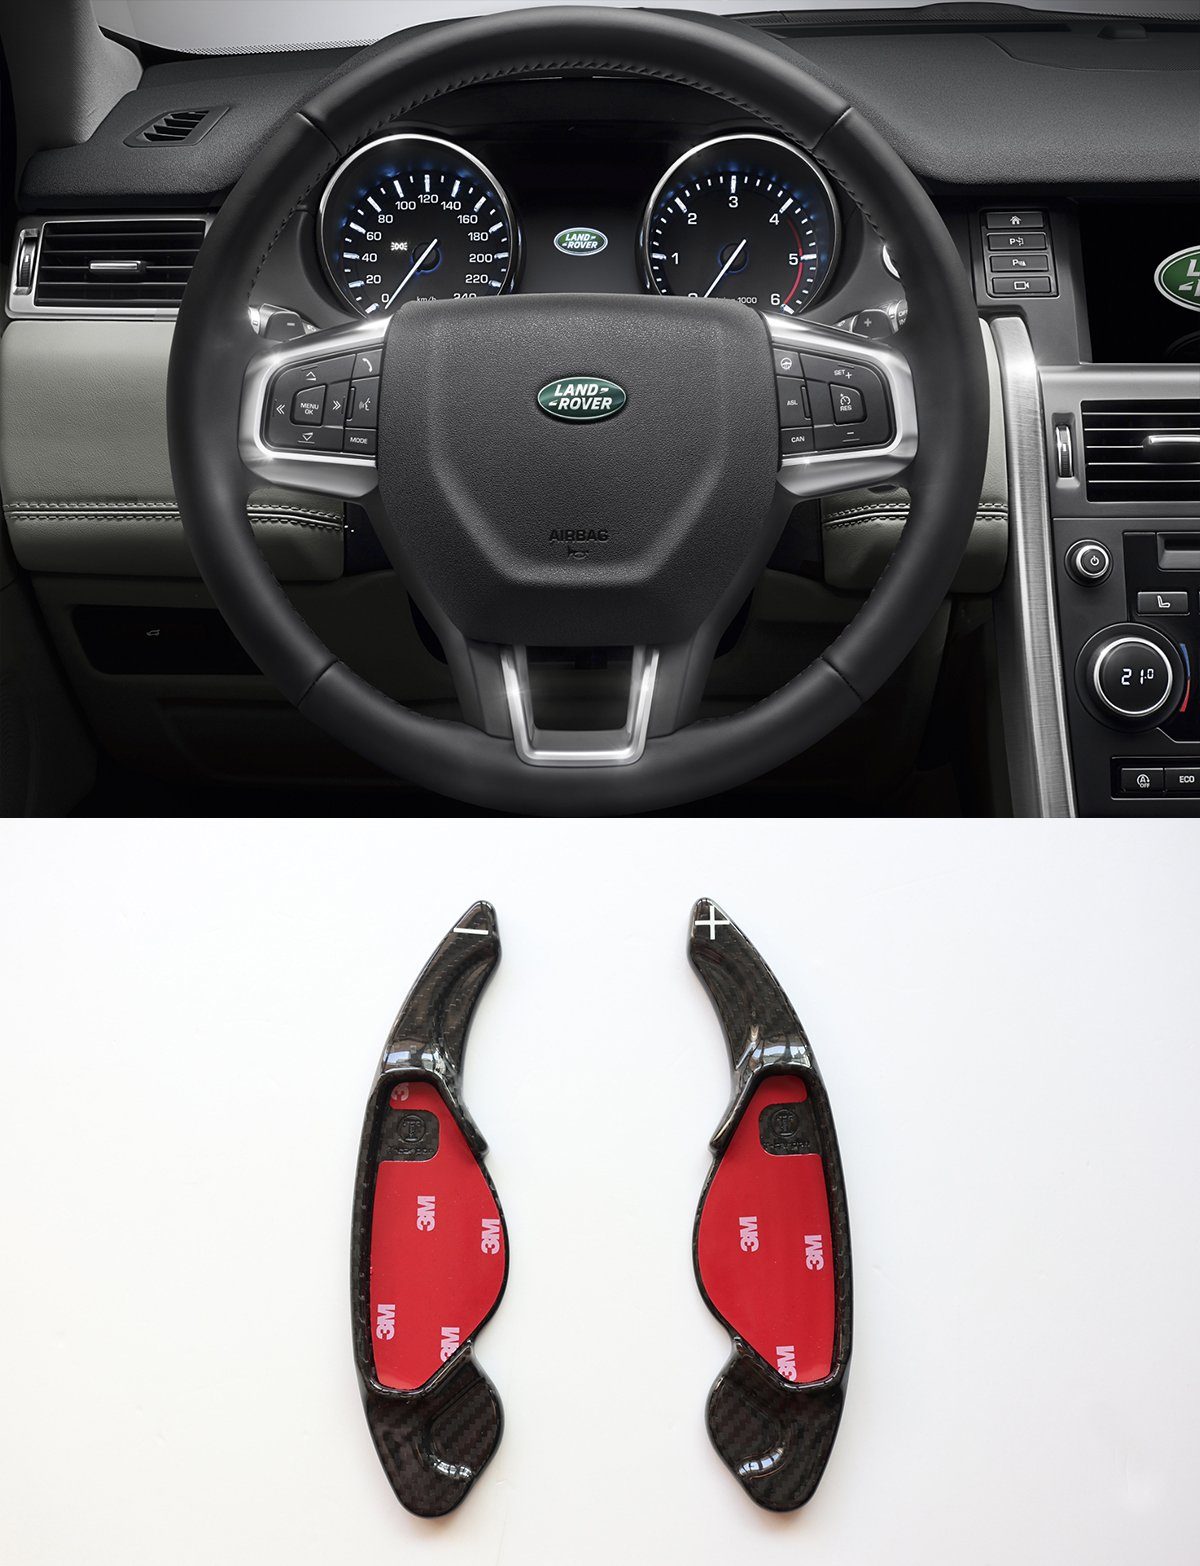 Pinalloy Carbon Fiber Steering Wheel Paddle Shifter Extension for Jaguar XF XJ Land Rover - Pinalloy Online Auto Accessories Lightweight Car Kit 